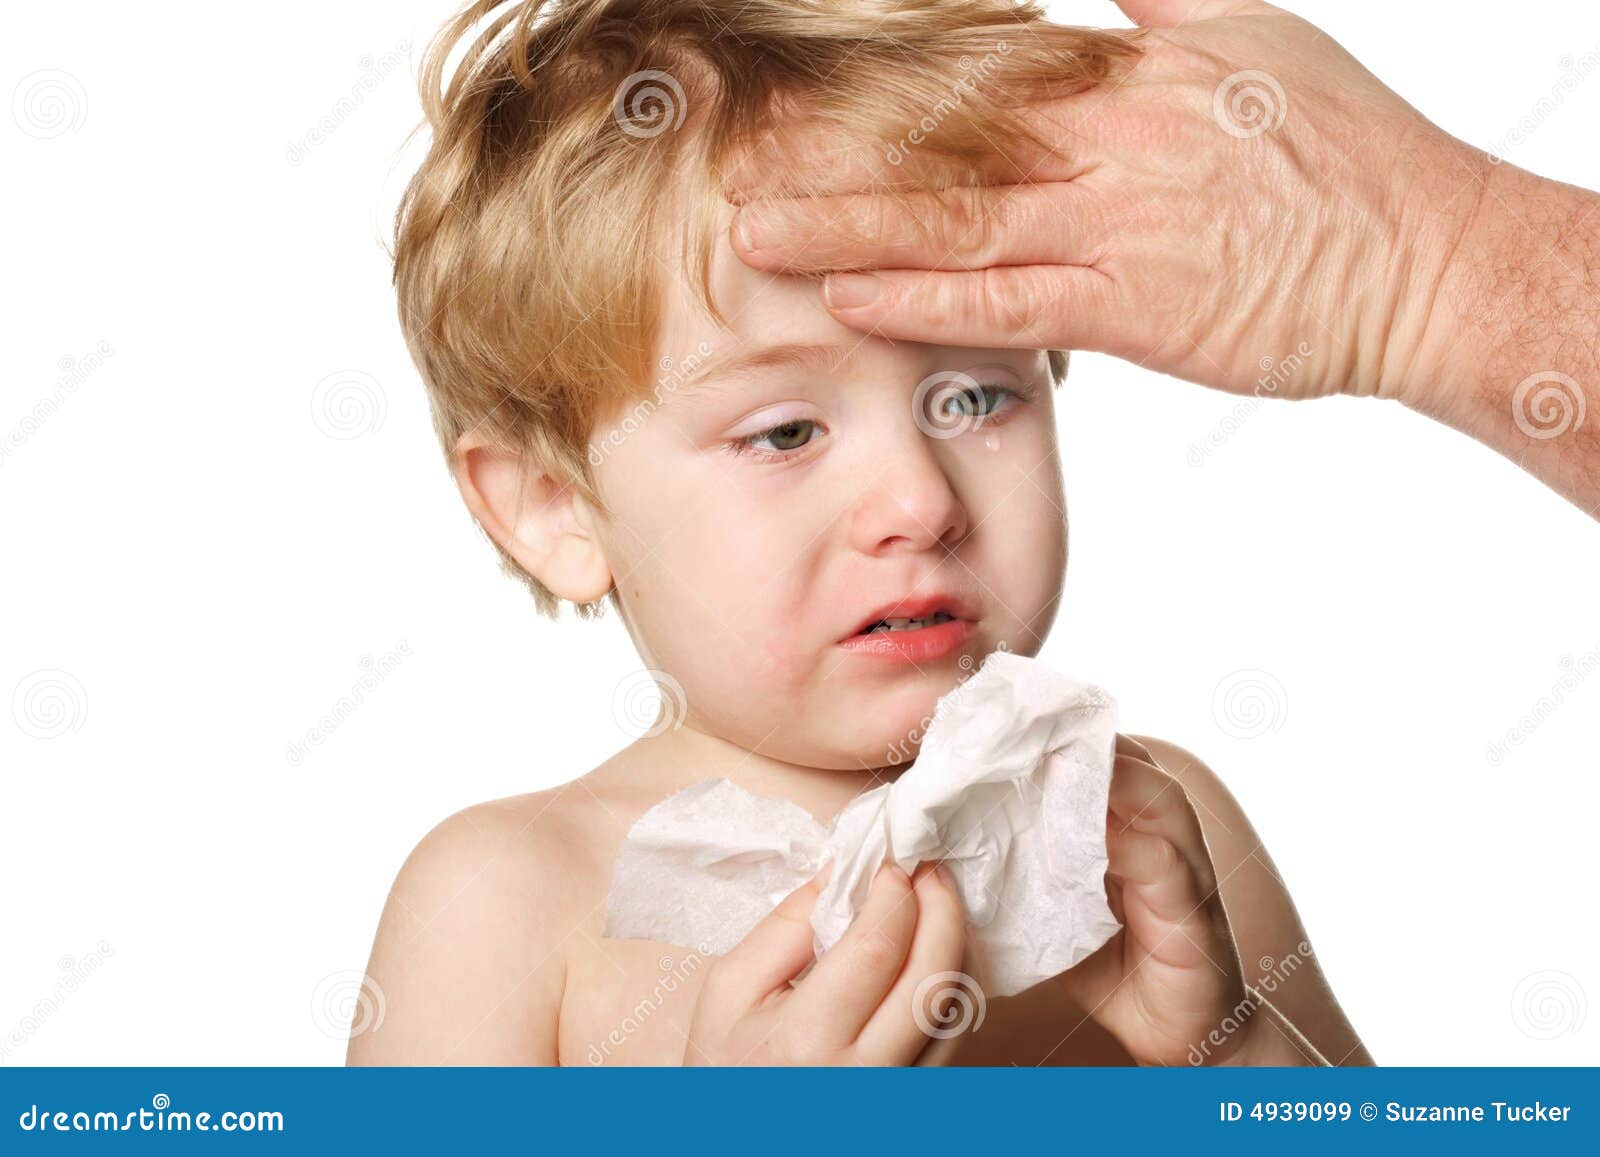 Sick Child Wiping His Nose Royalty Free Stock Images ...